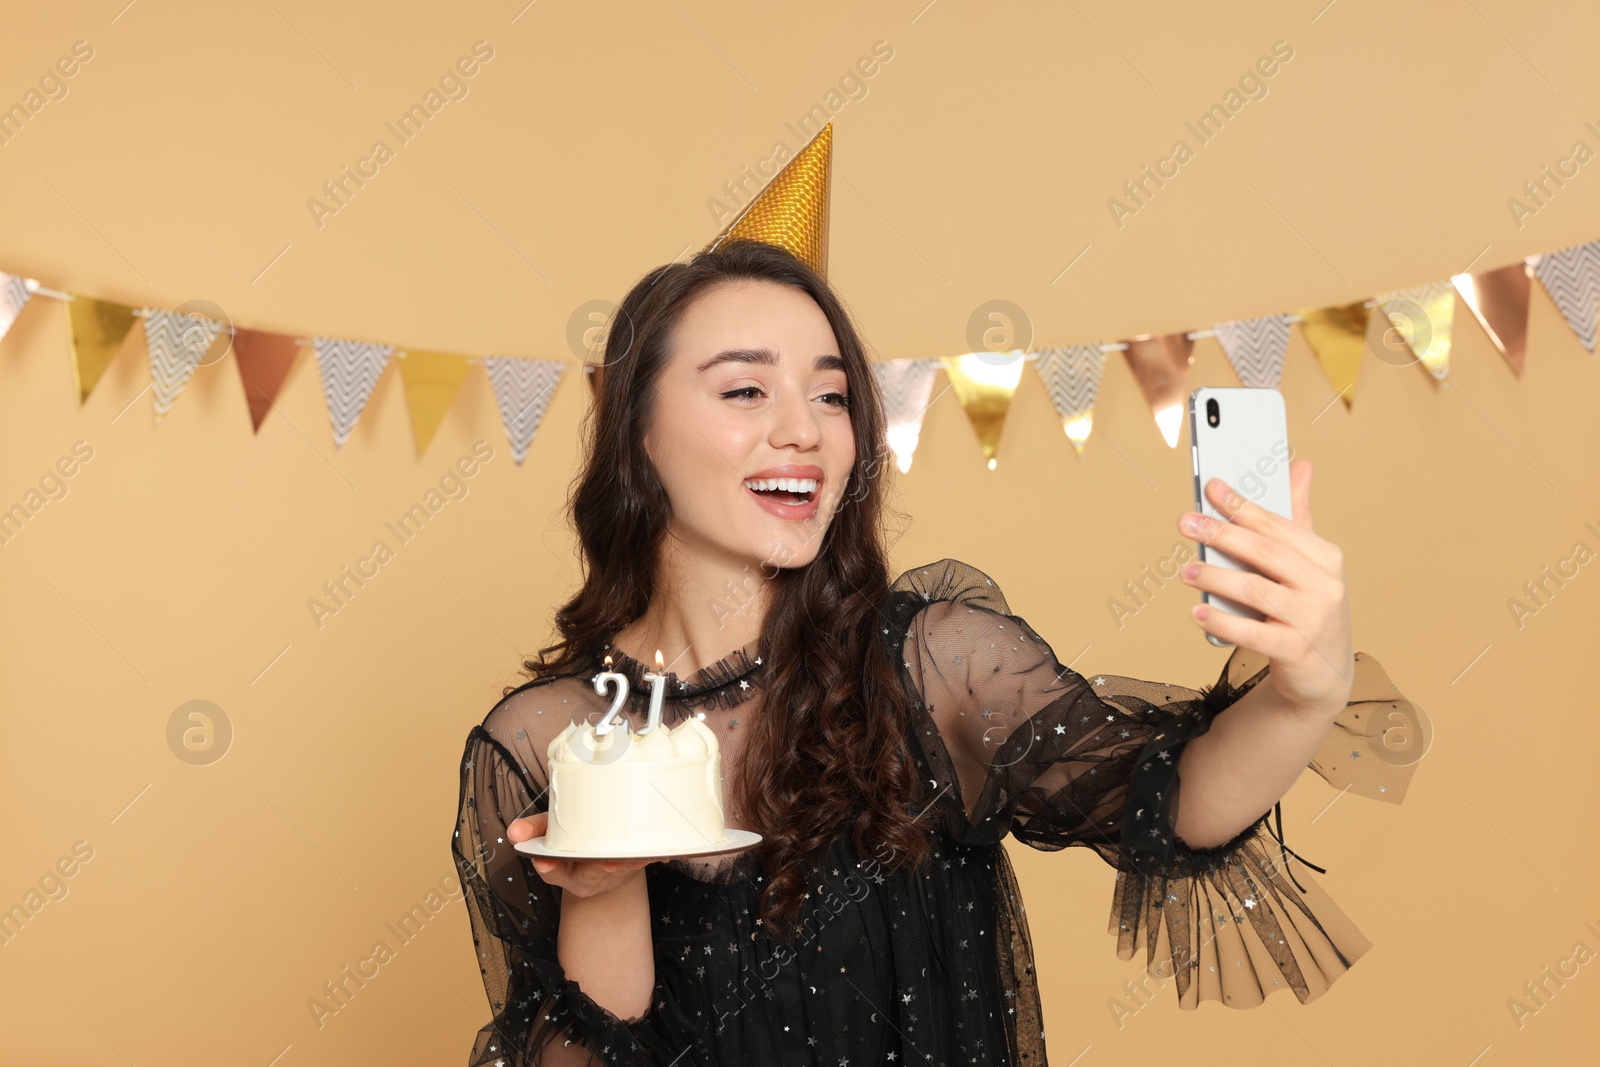 Photo of Coming of age party - 21st birthday. Smiling woman holding delicious cake with number shaped candles and taking selfie against beige background